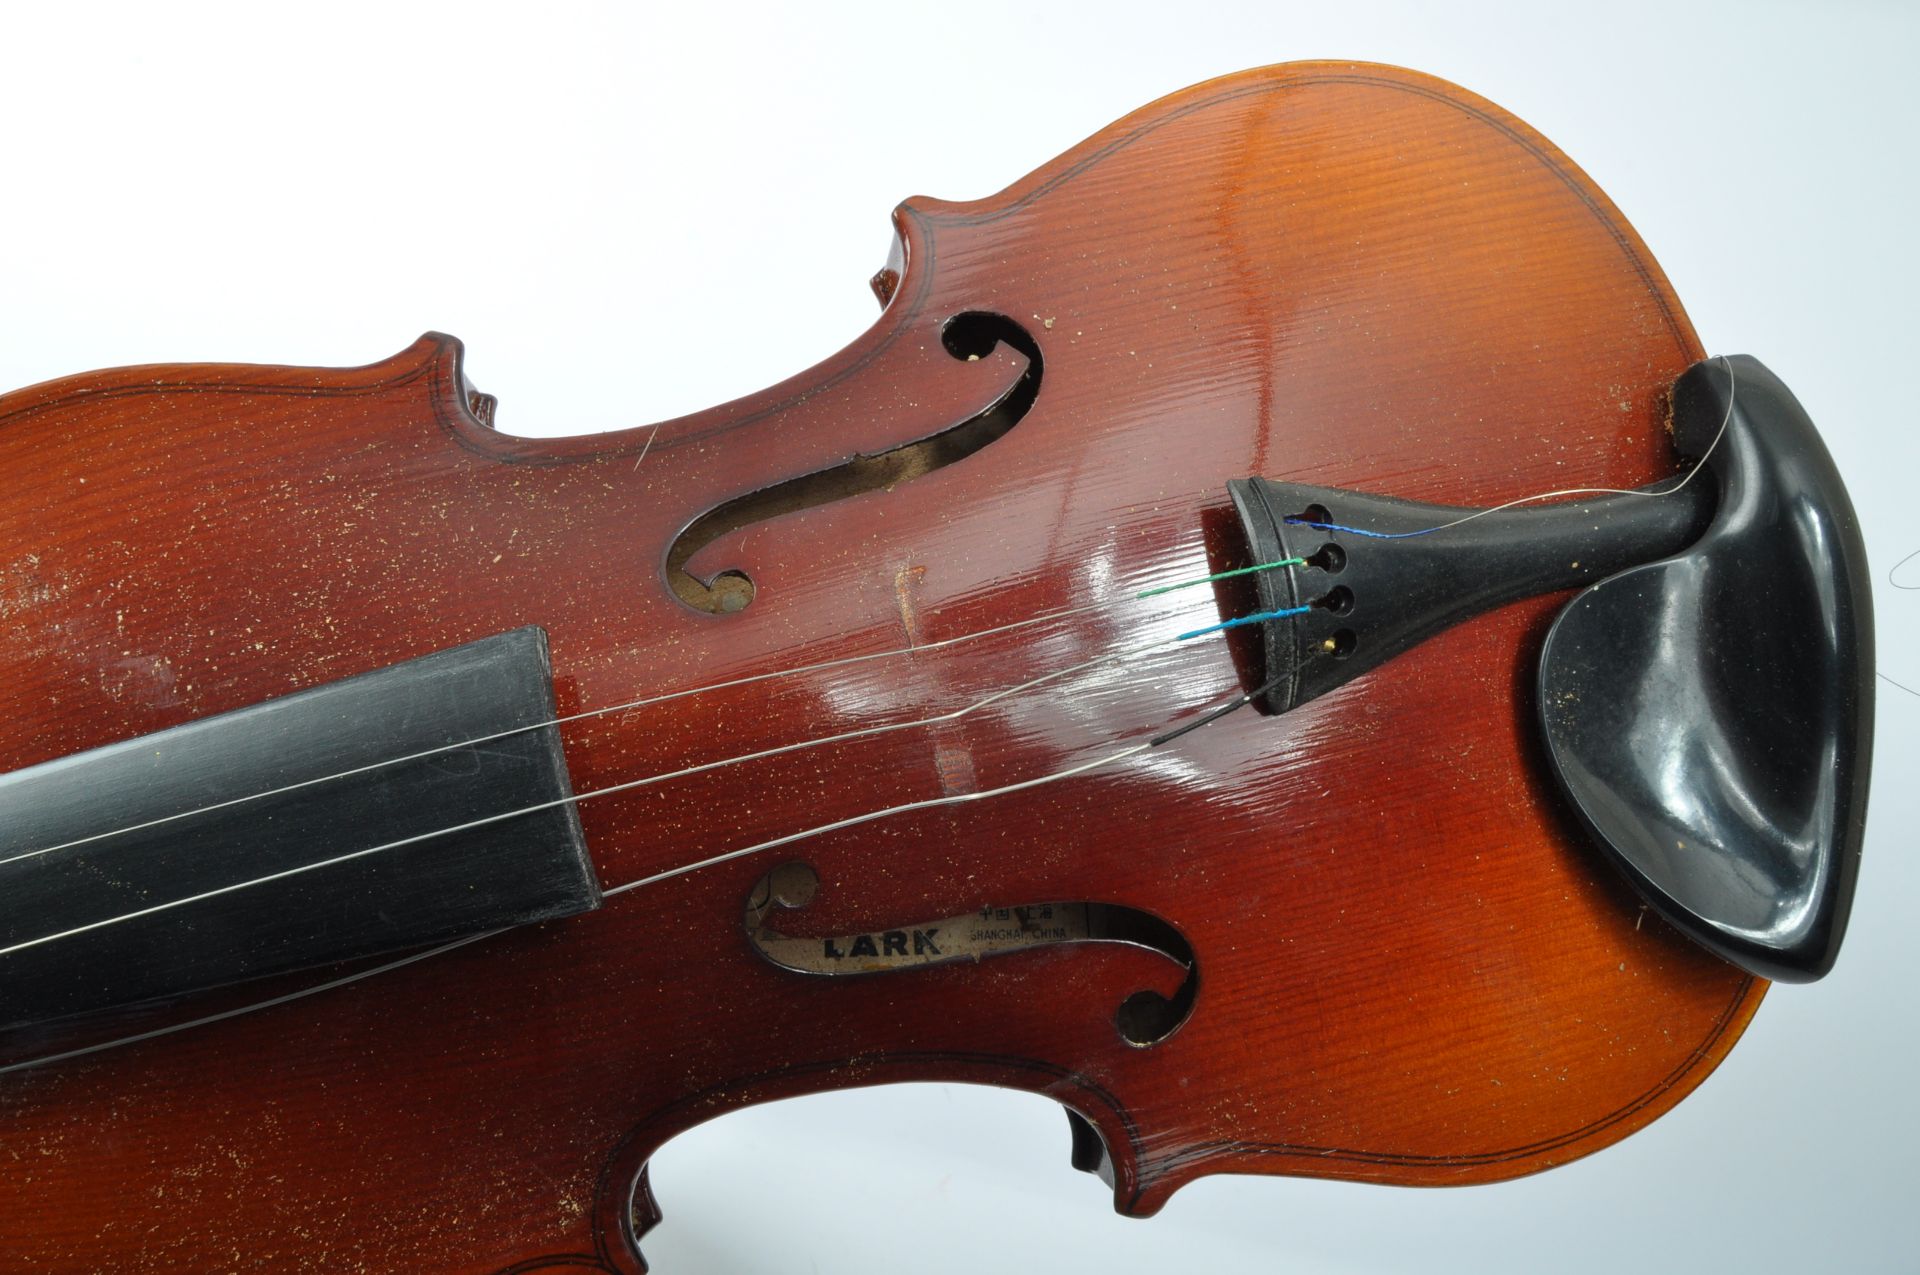 VINTAGE 20TH CENTURY LARK VIOLIN WITH BOW & CASE - Image 5 of 5